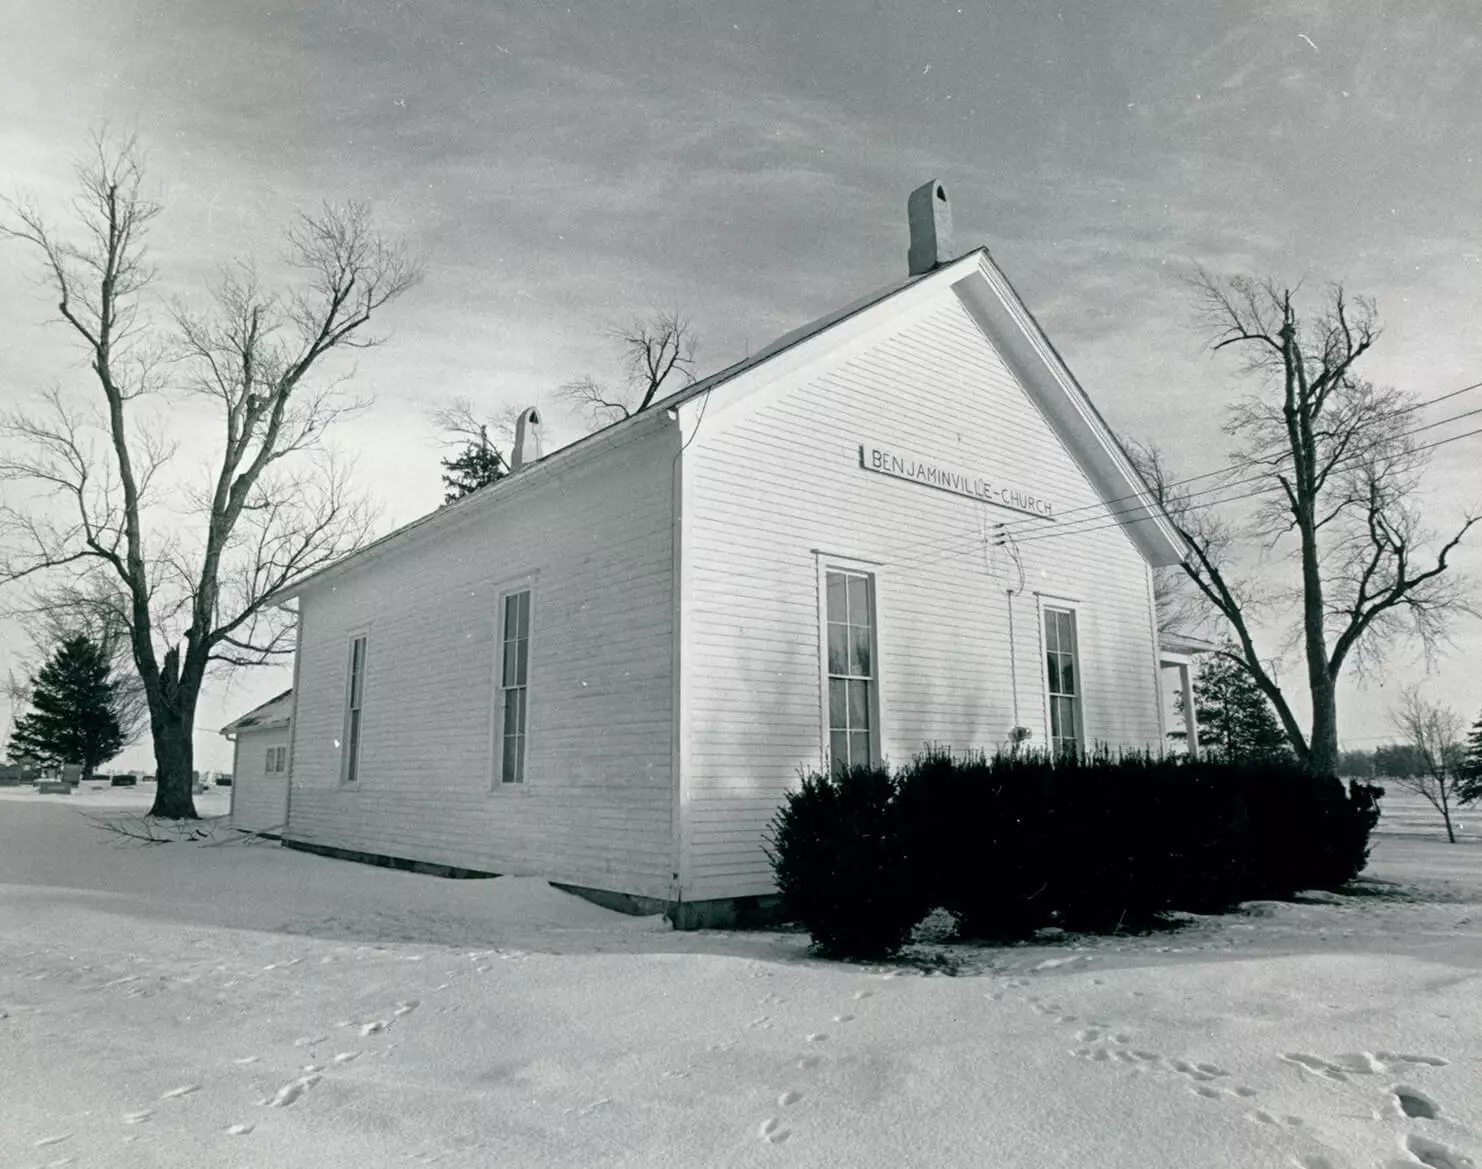 Photo of a small white single-room church surrounded by evergreen bushes and leafless trees in the winter. There is snow on the ground